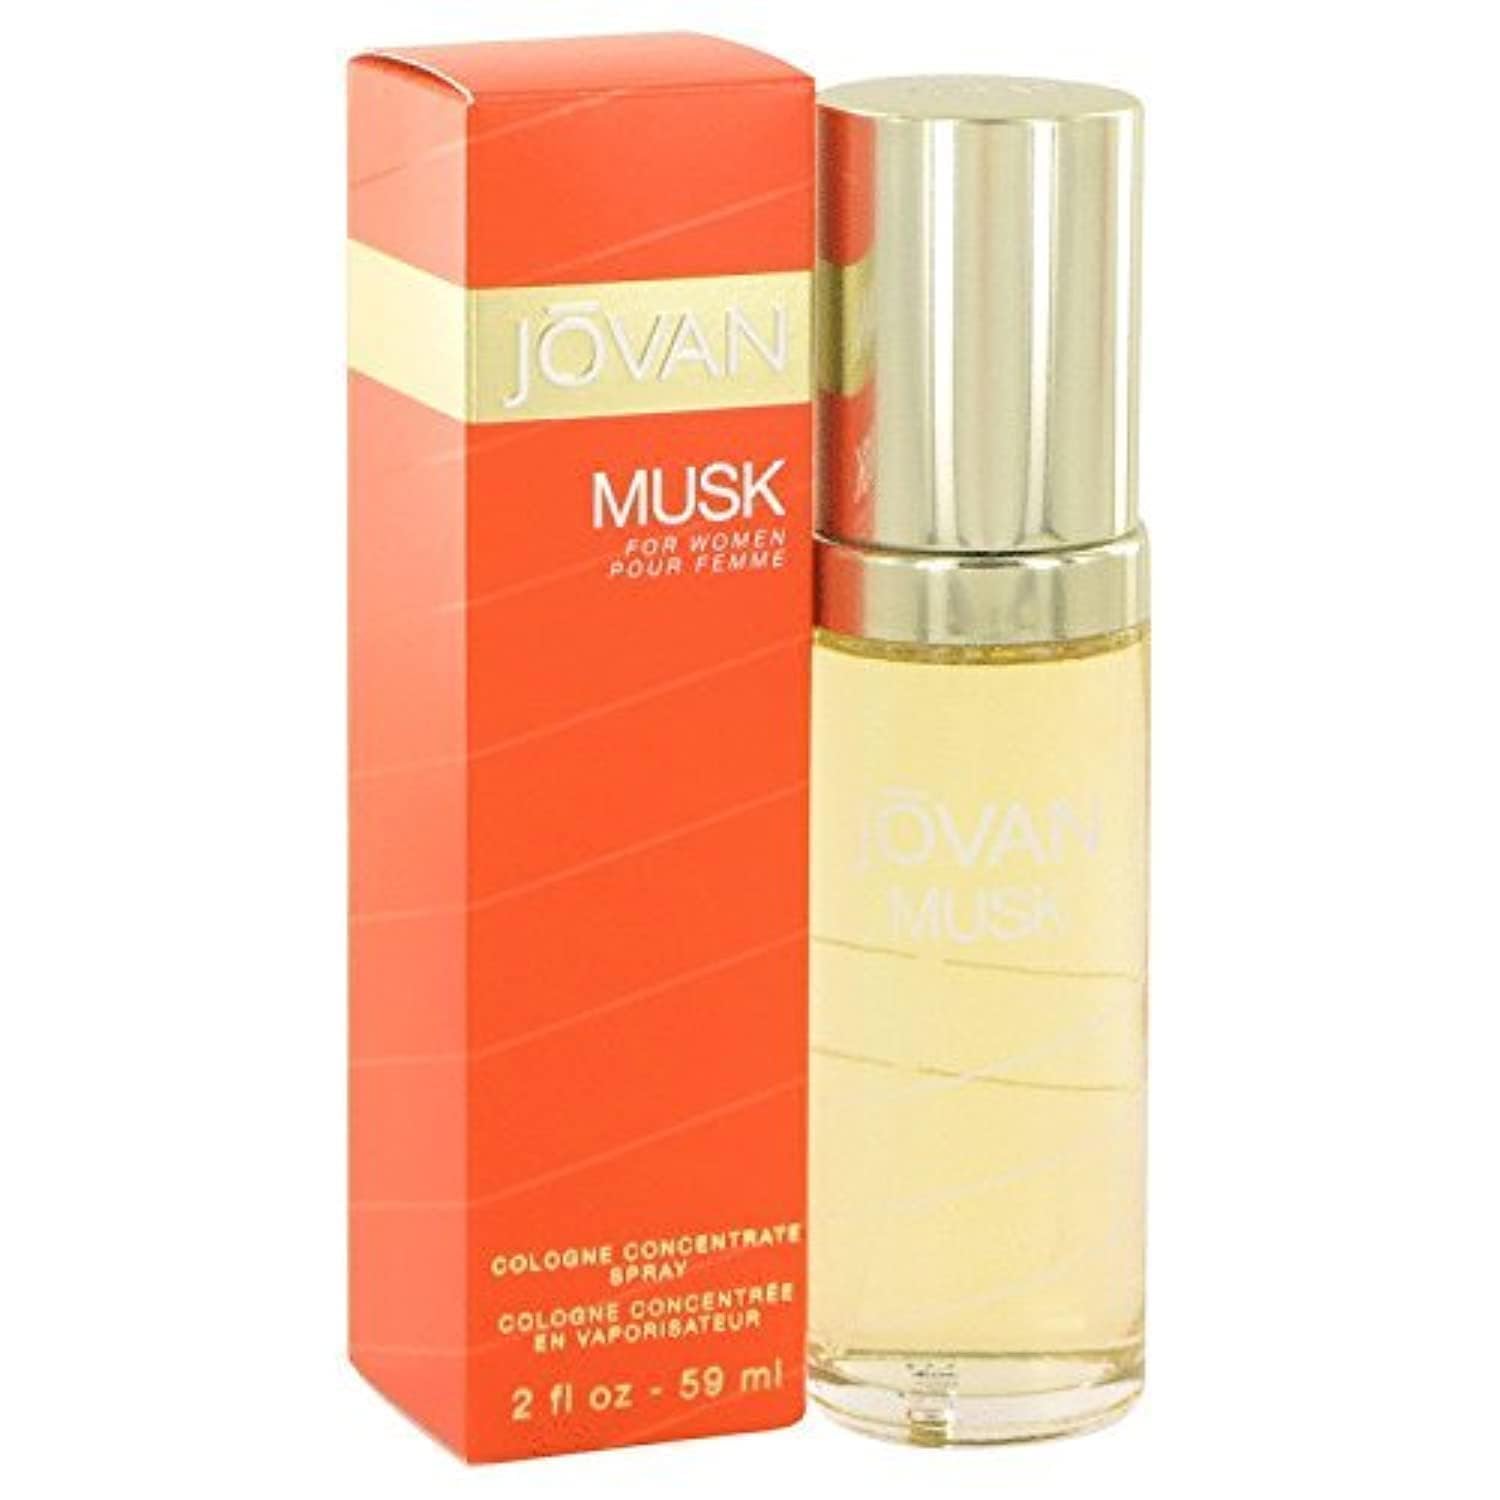 Jovan Musk By Jovan Cologne Concentrate Spray 2 Oz Women